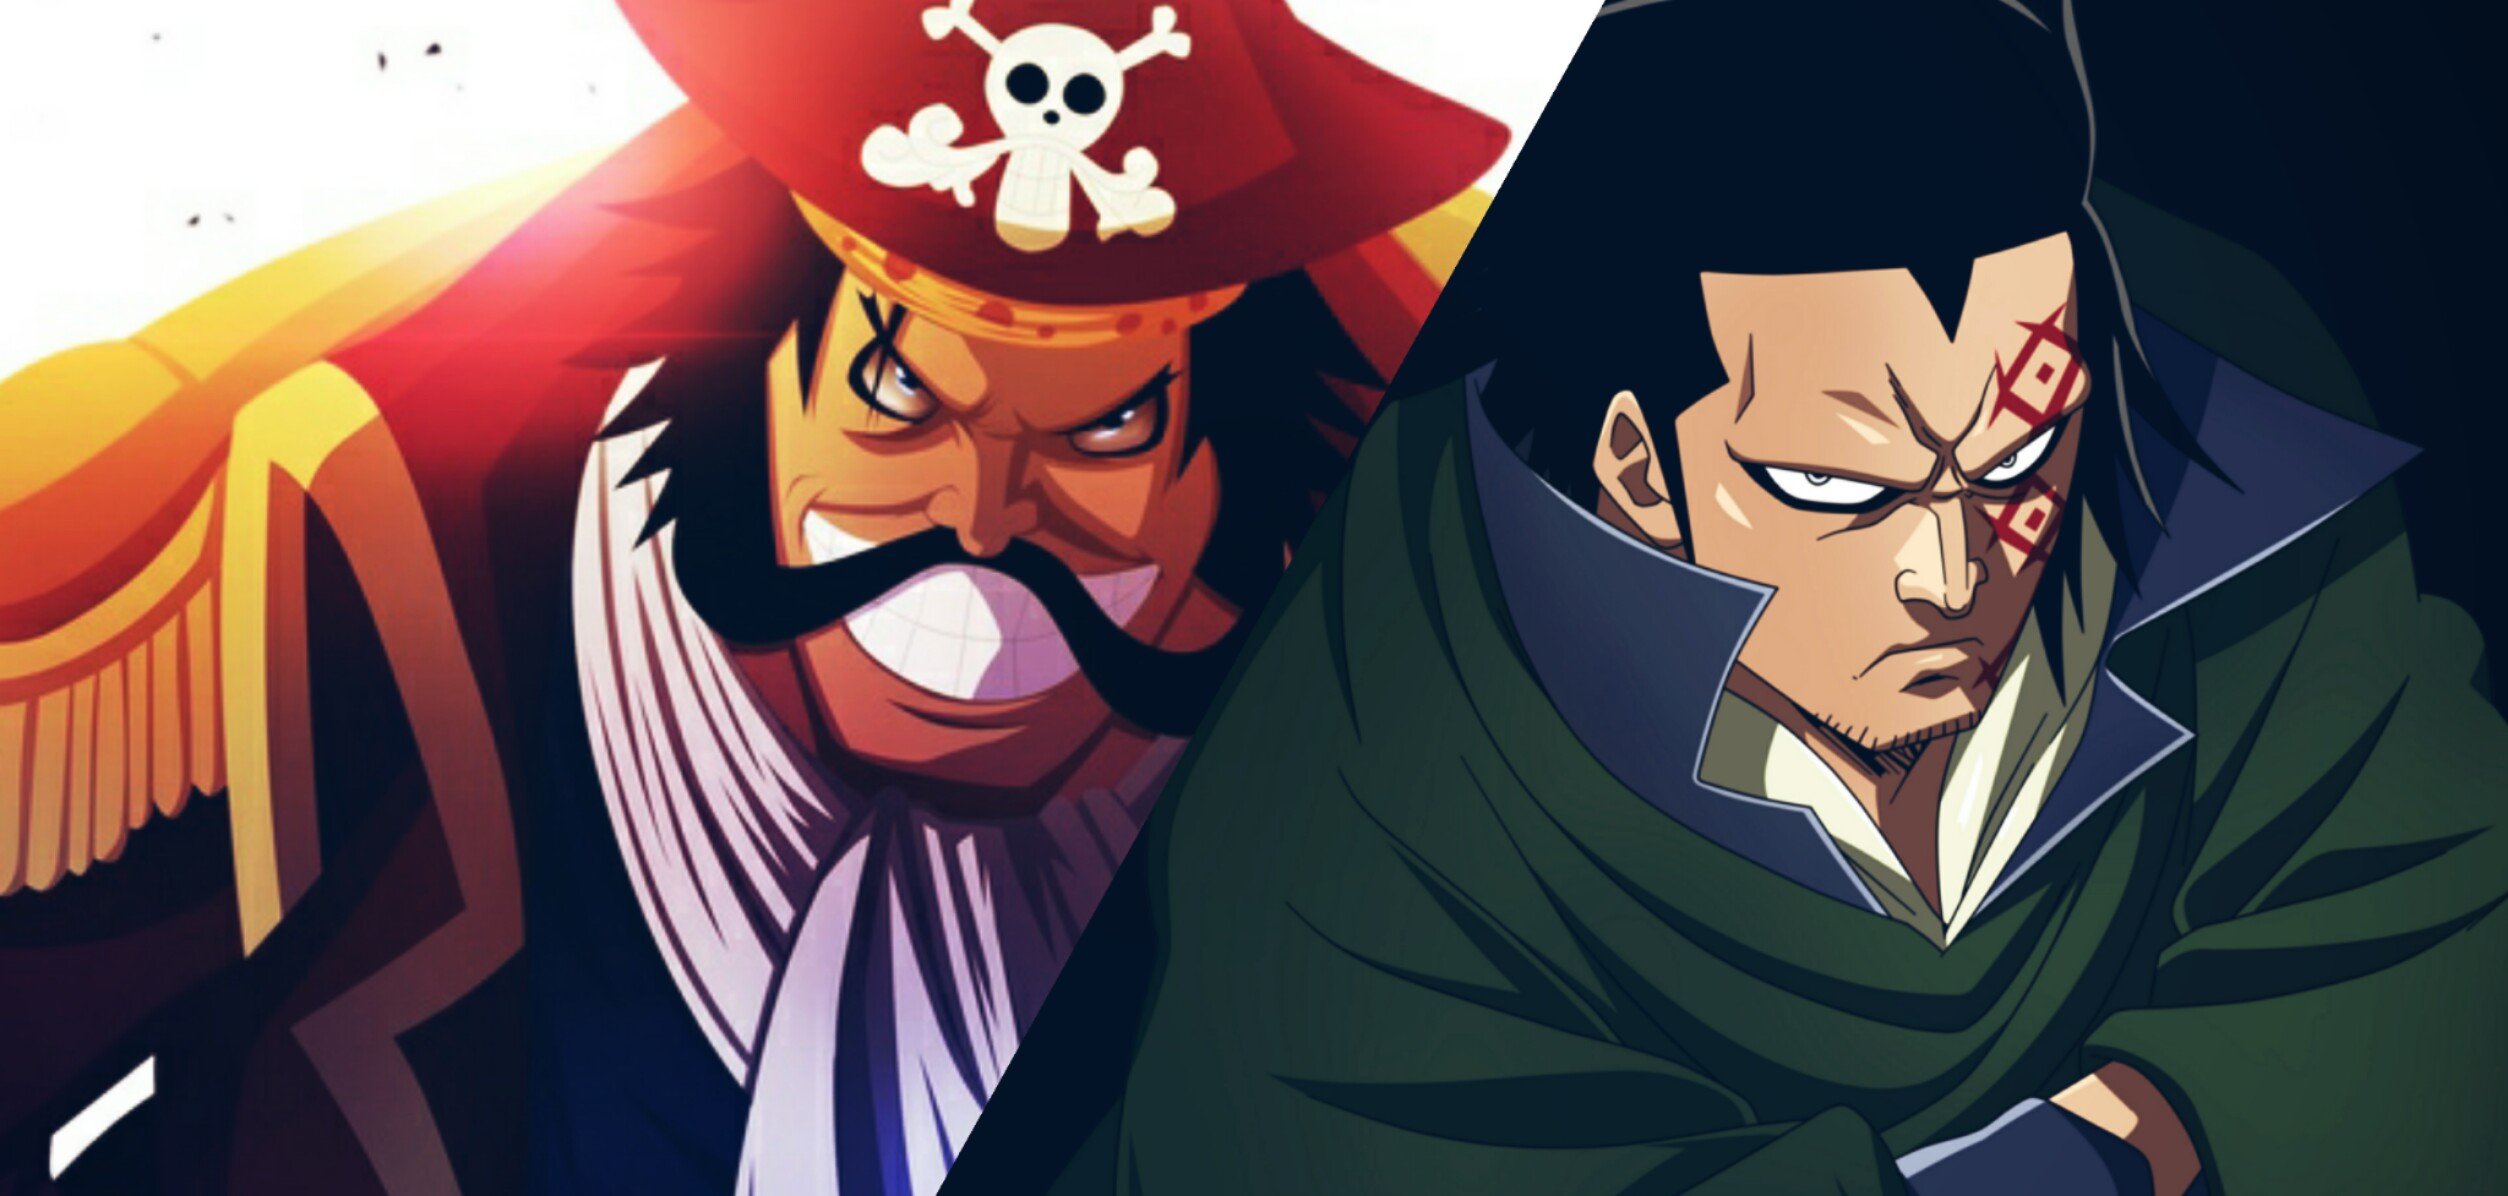 That is the connection between Monkey D. Dragon and Gol D. Roger in One Piece